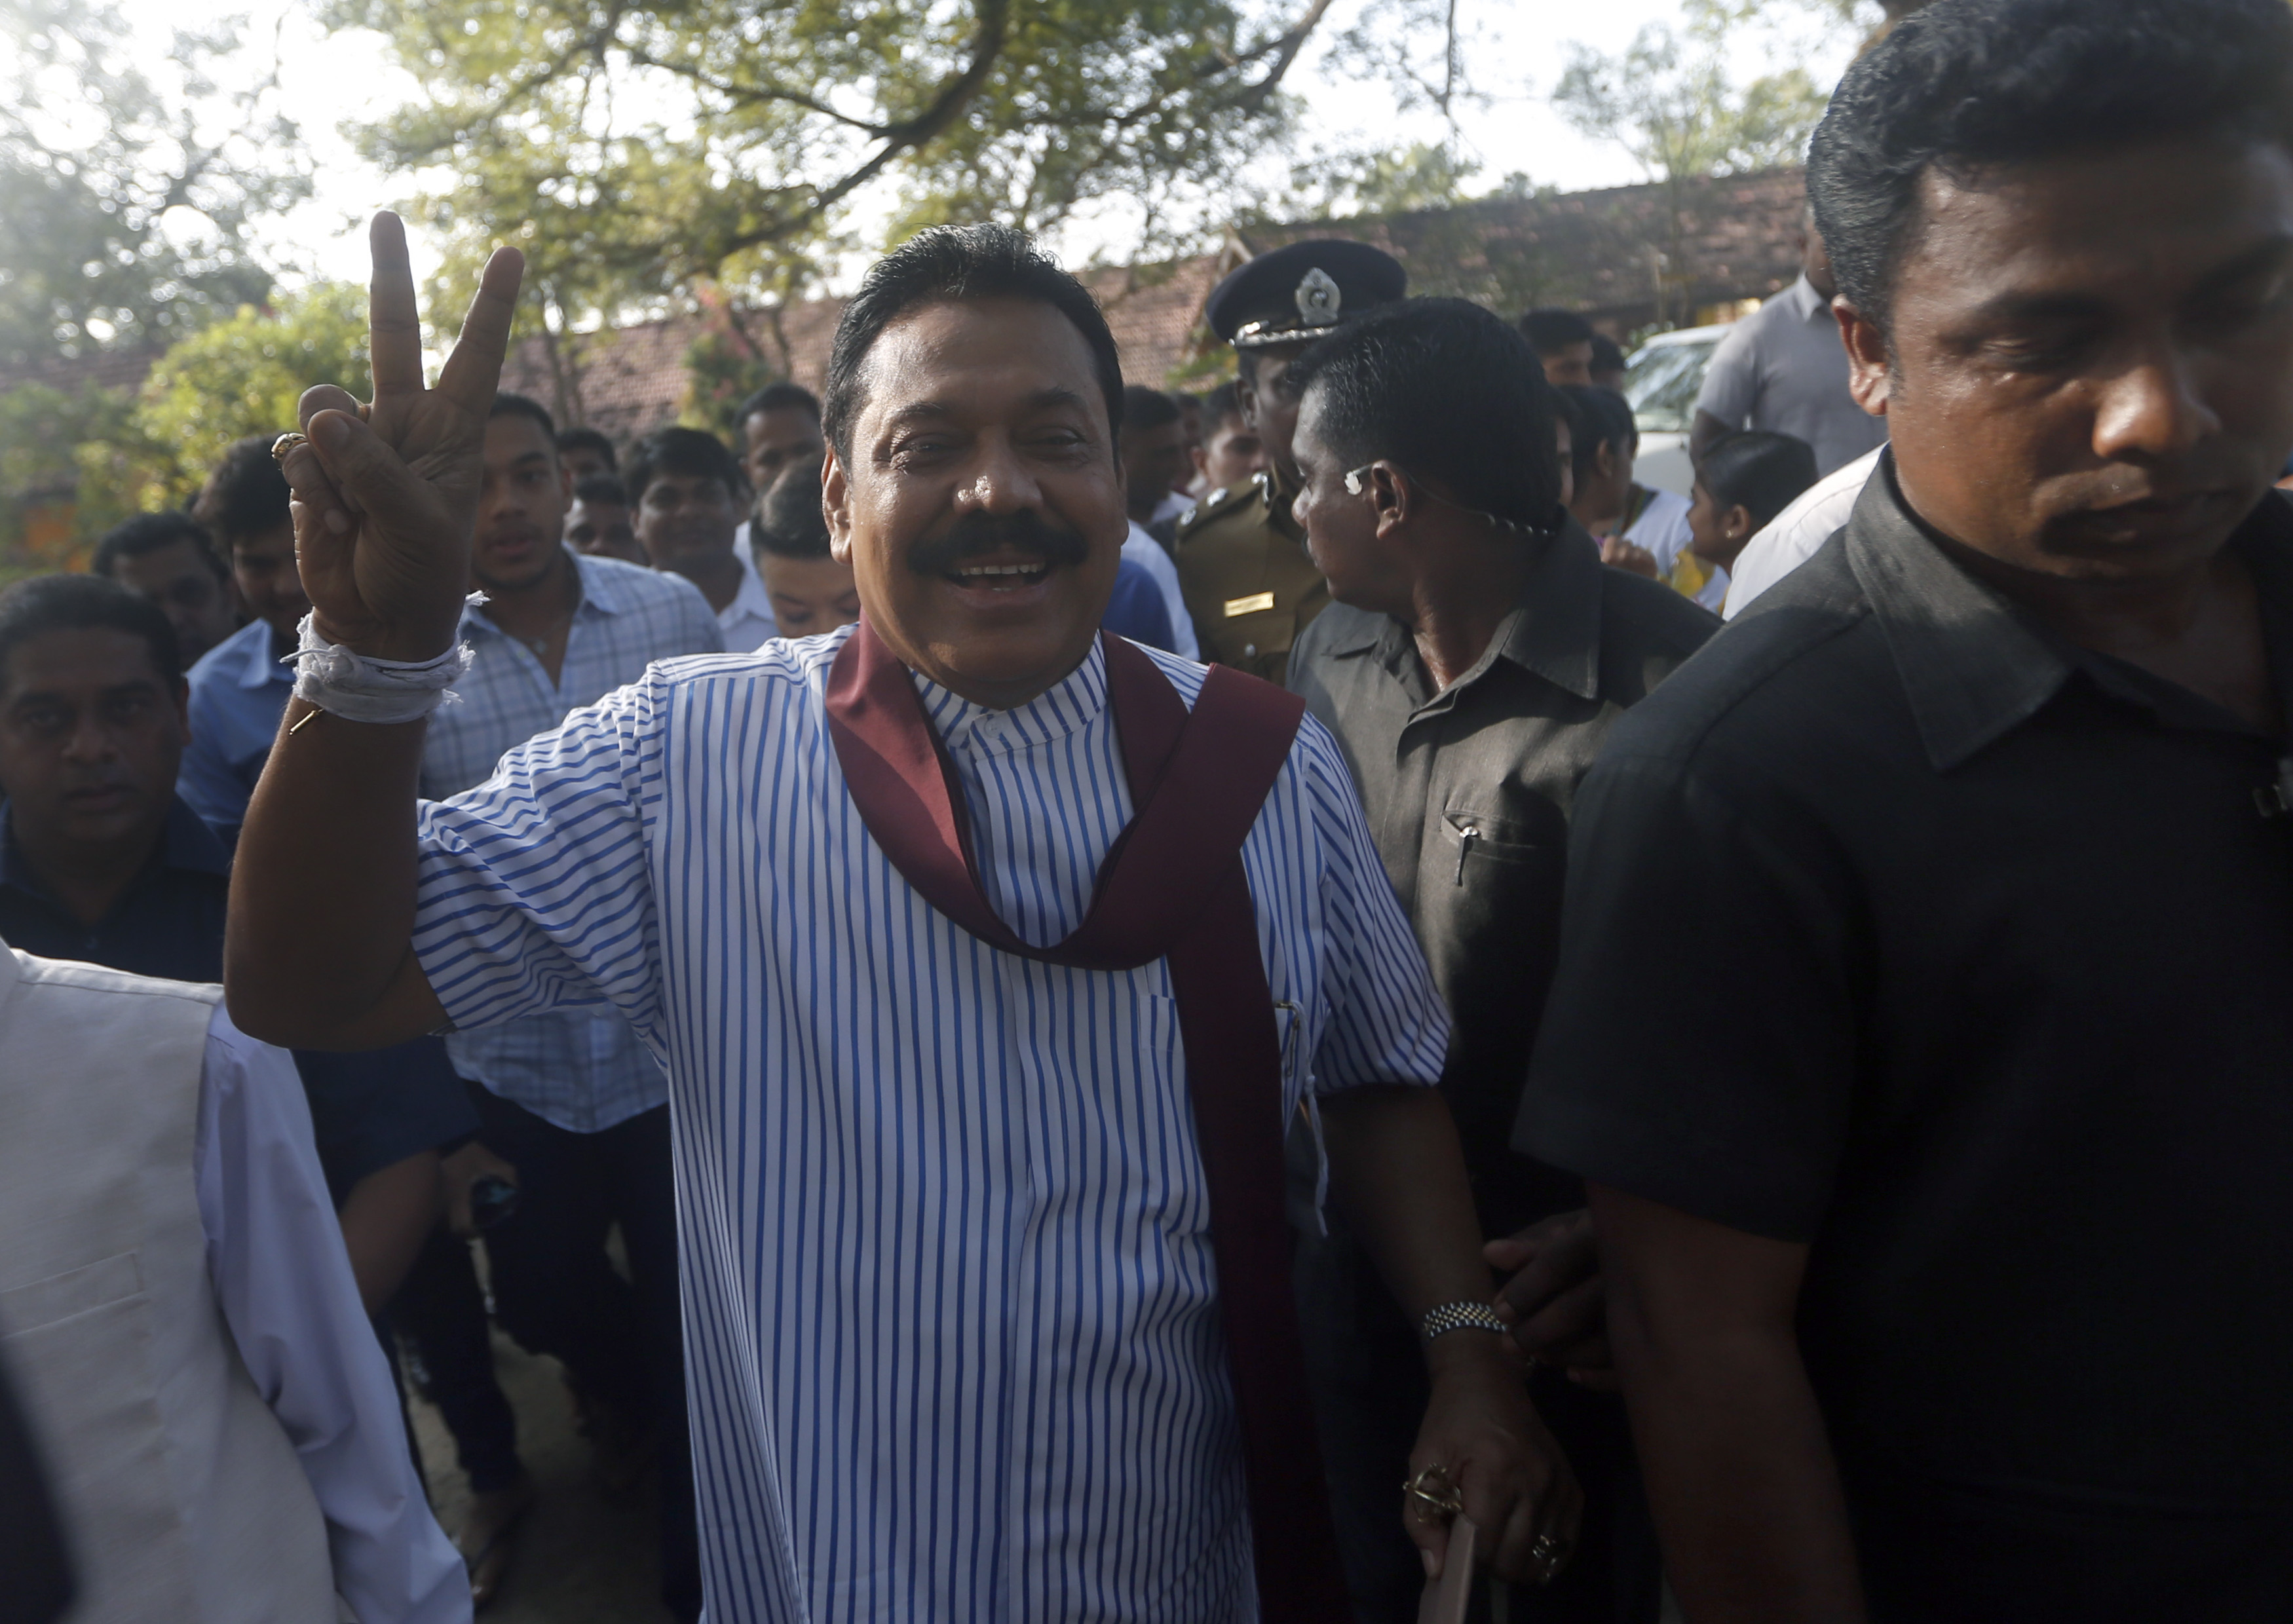 Sri Lanka's President Mahinda Rajapaksa gestures to the media after casting his vote for the presidential election, in Medamulana, January 8, 2015. (Dinuka Liyanawatte—REUTERS)